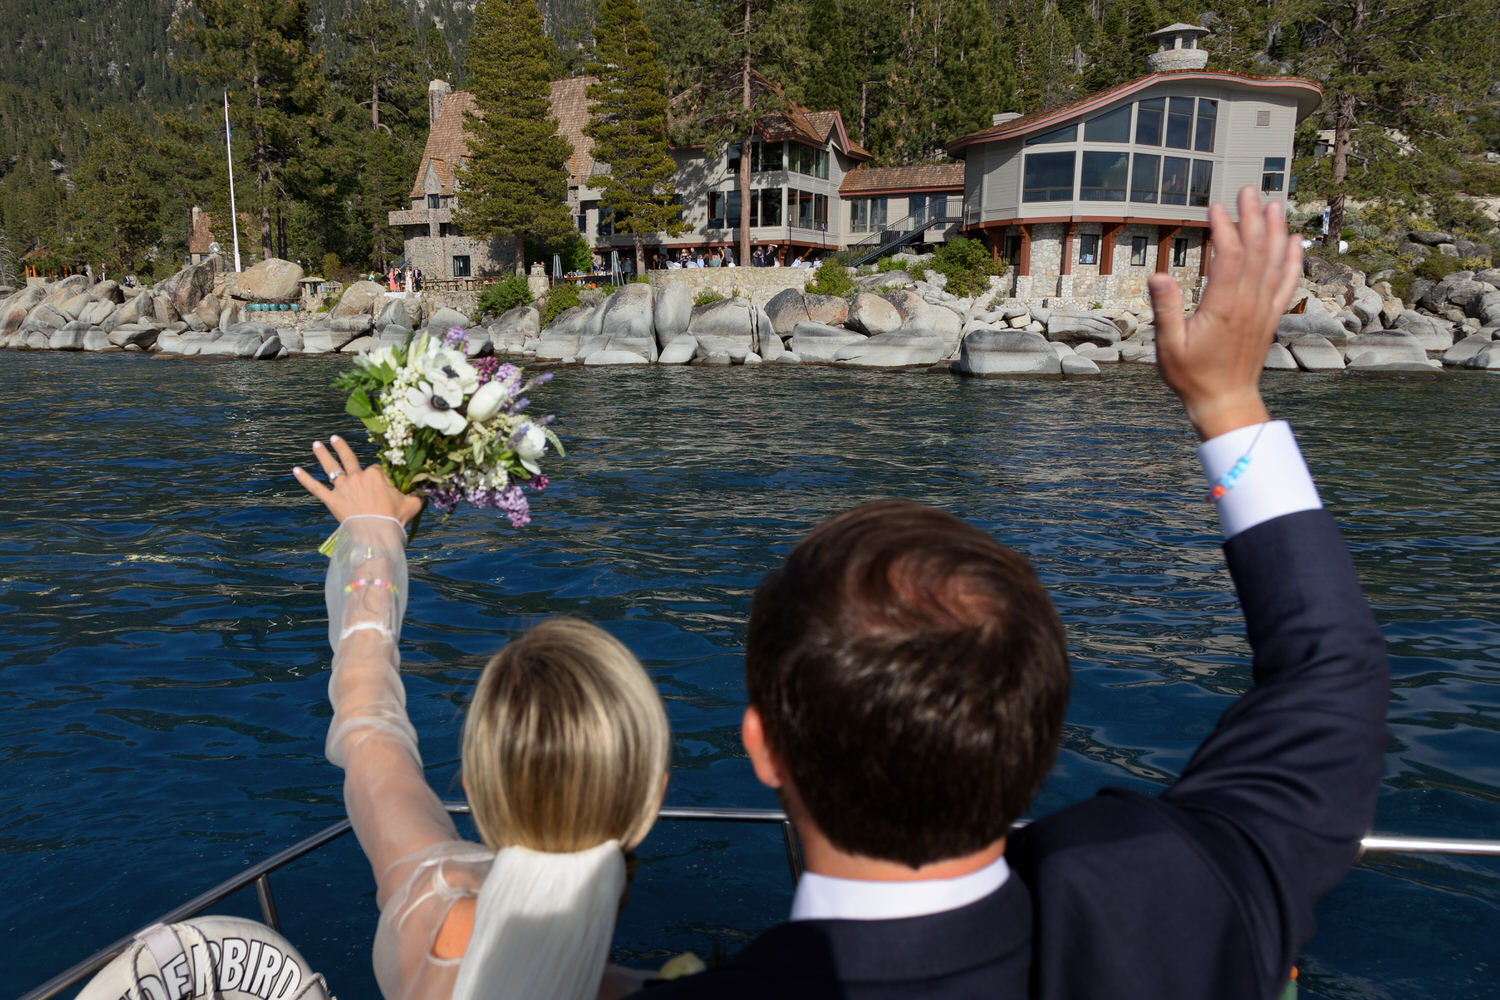 A bride and groom aboard the Thunderbird Yacht wave to wedding guests on the lawn.